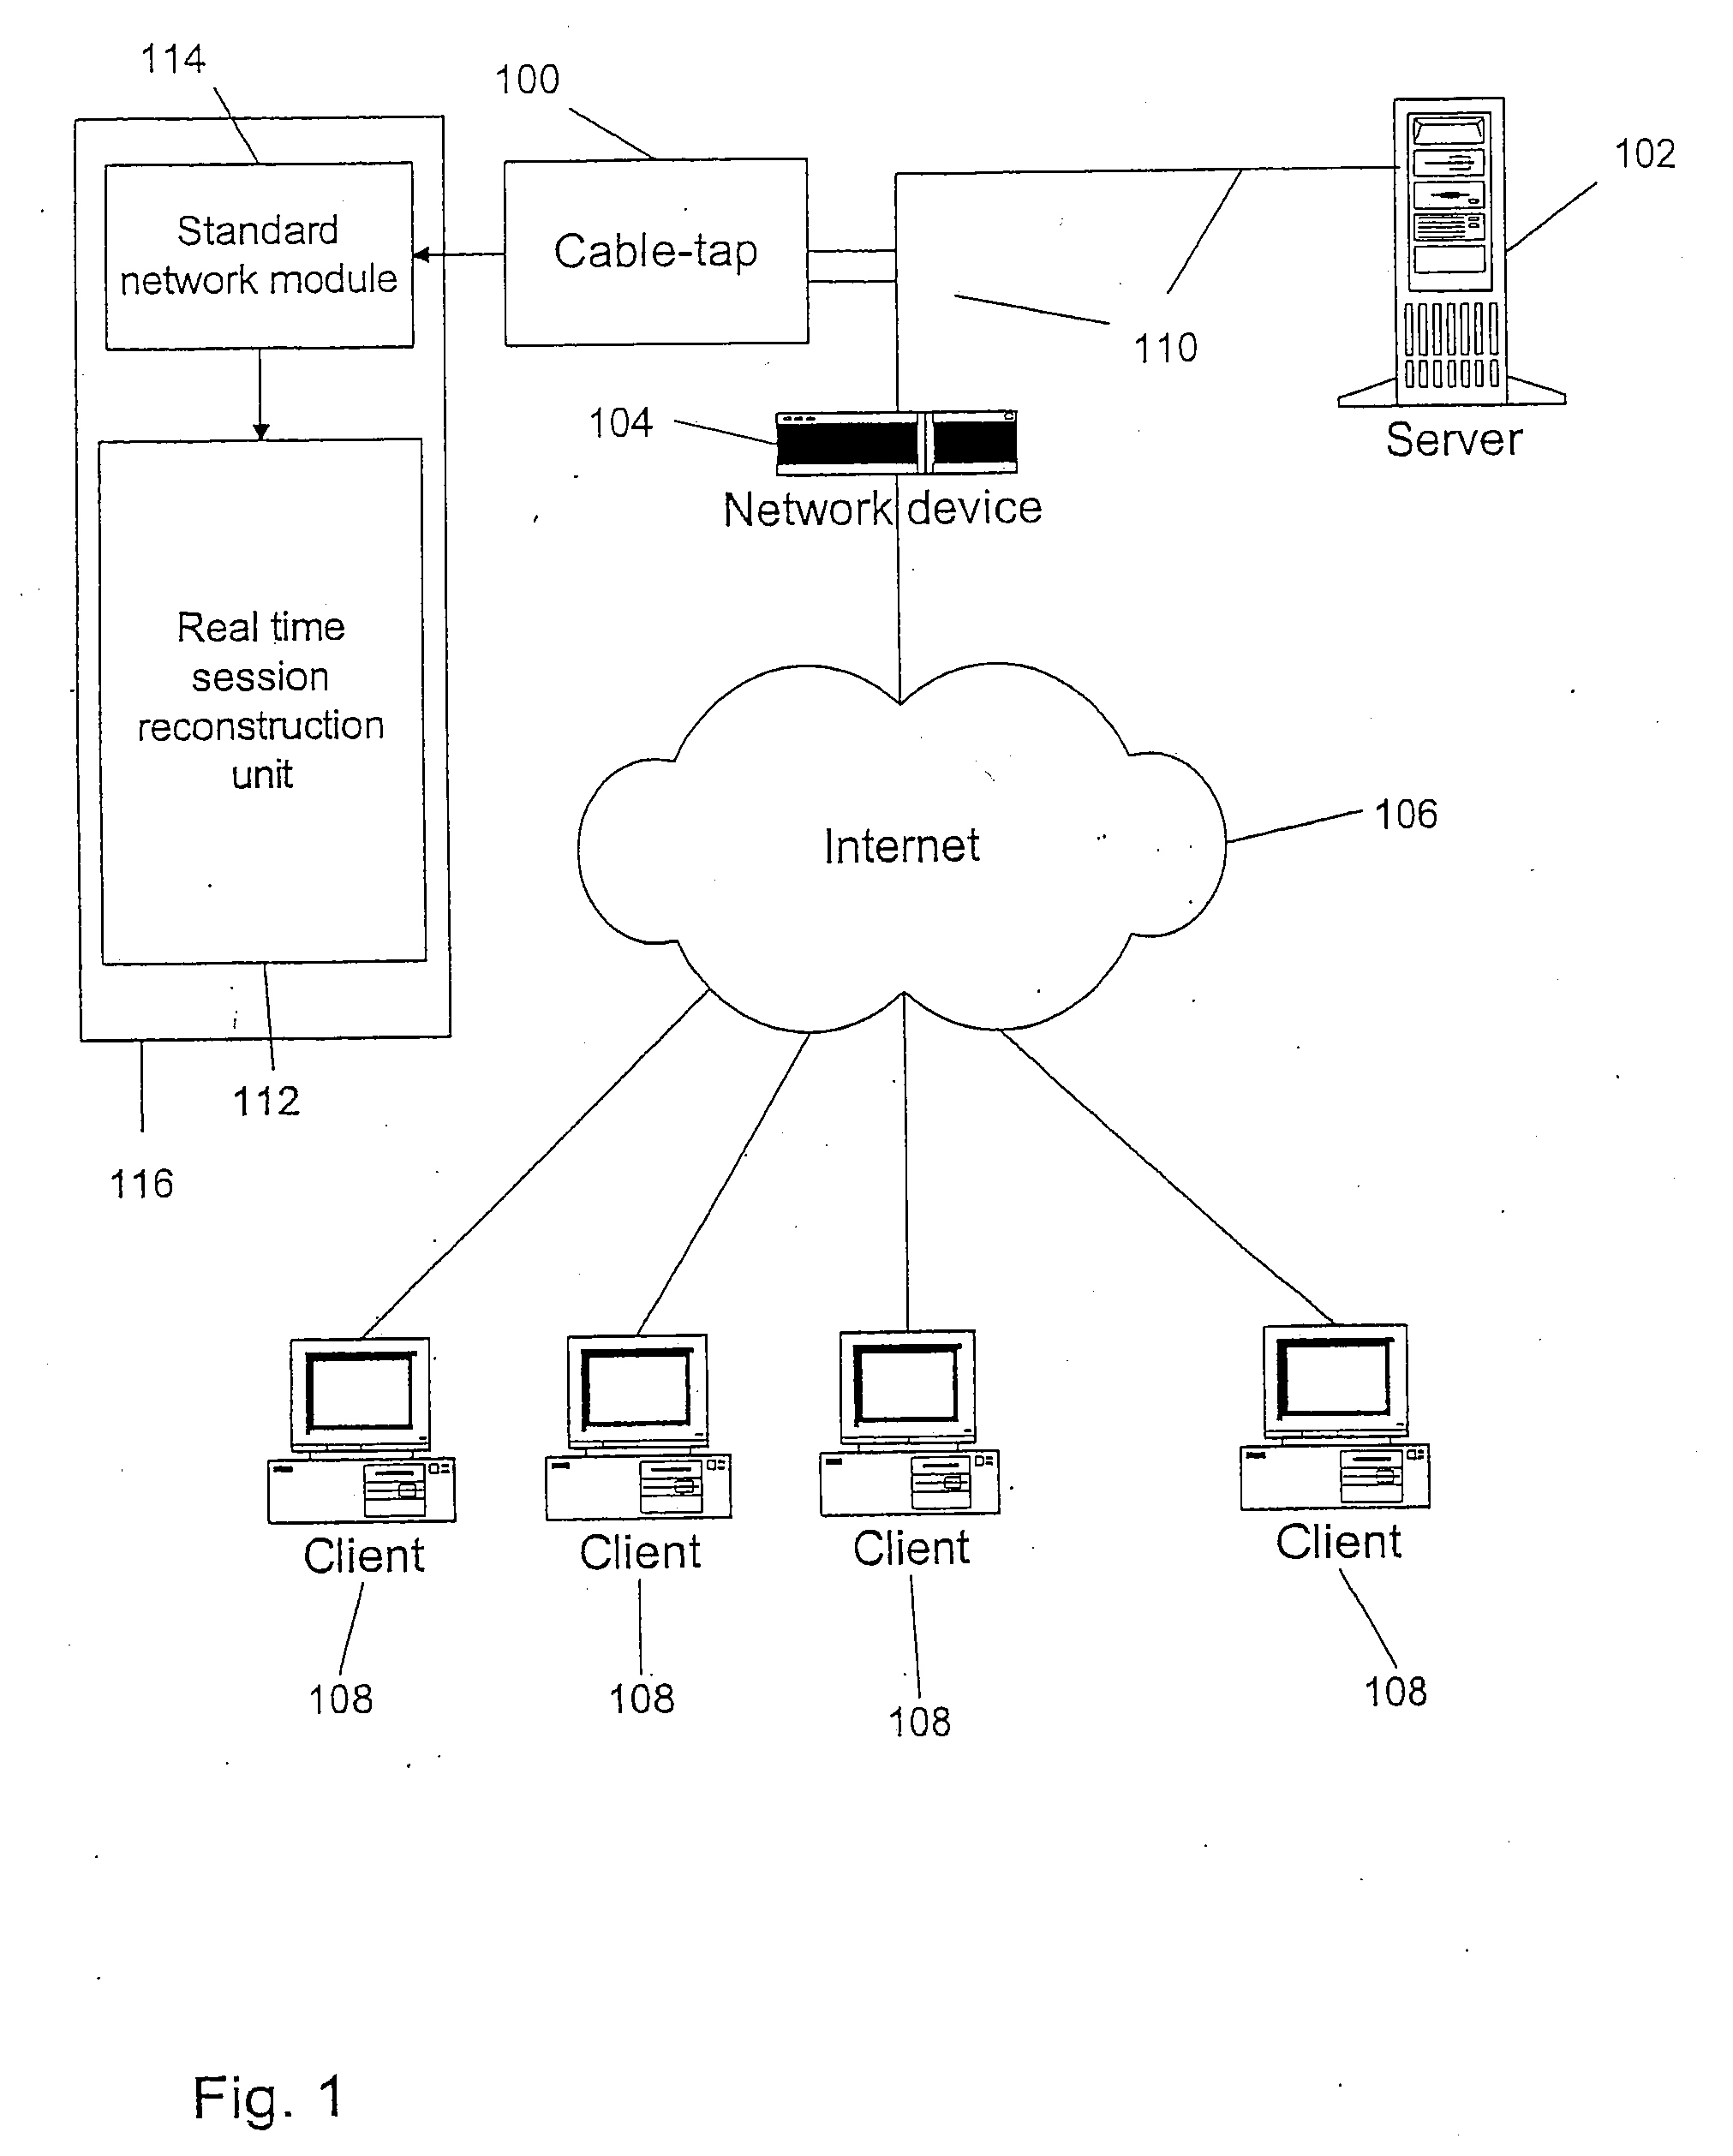 Method of non-intrusive analysis of secure and non-secure web application traffic in real-time